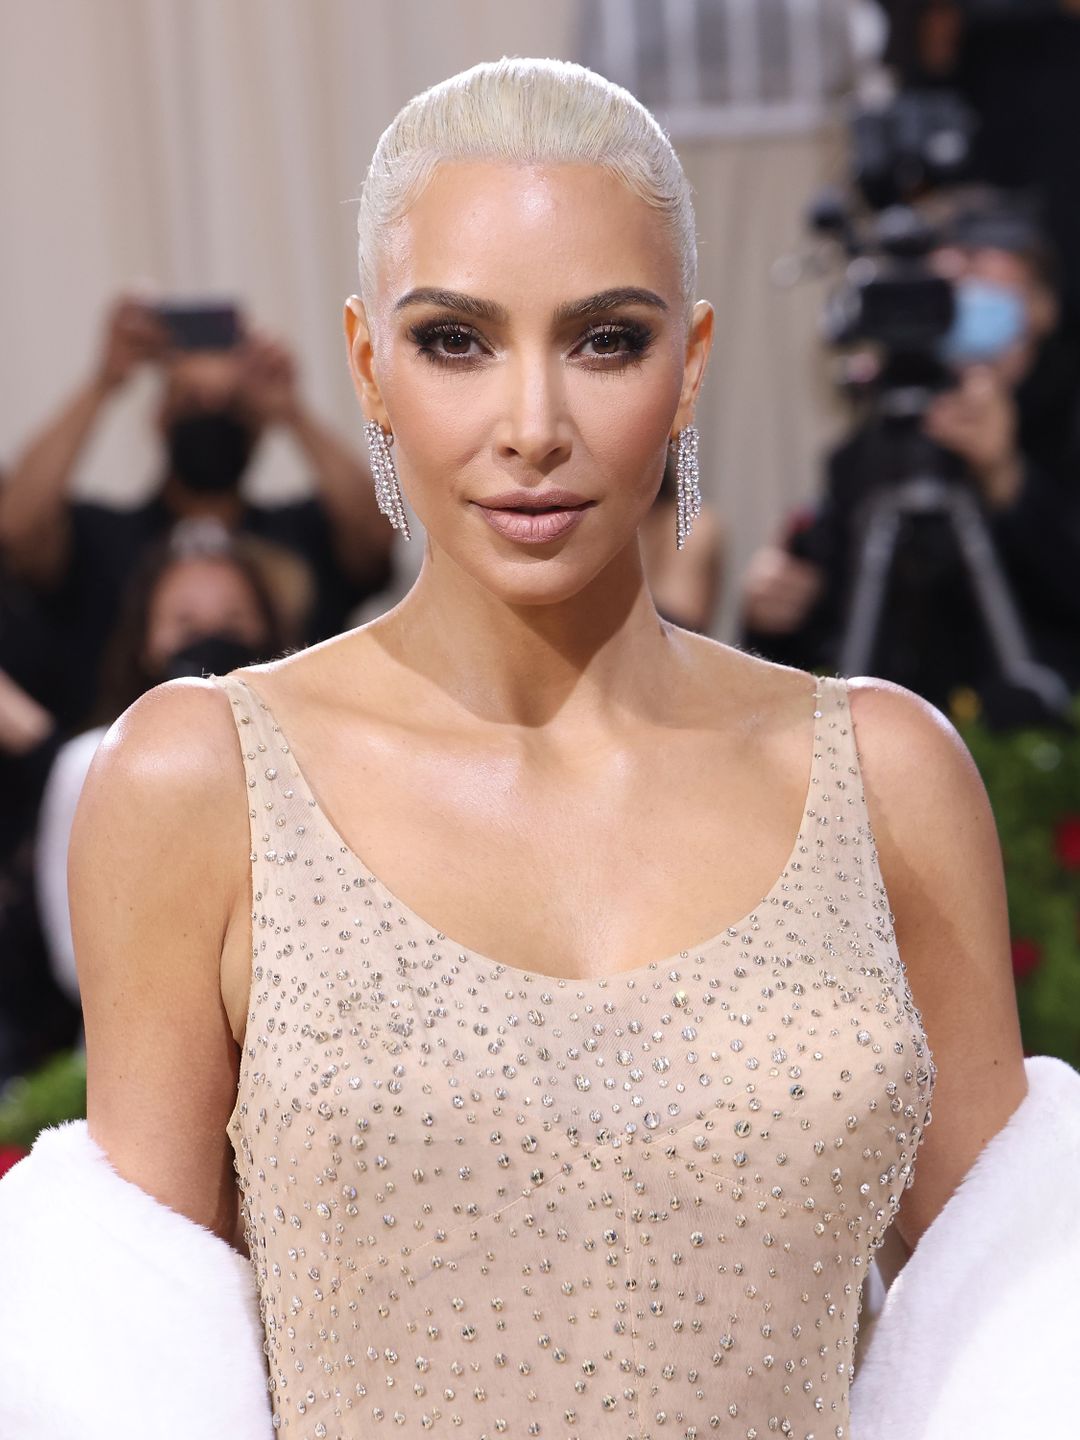 NEW YORK, NEW YORK - MAY 02: Kim Kardashian attends "In America: An Anthology of Fashion," the 2022 Costume Institute Benefit at The Metropolitan Museum of Art on May 02, 2022 in New York City. (Photo by Taylor Hill/Getty Images)